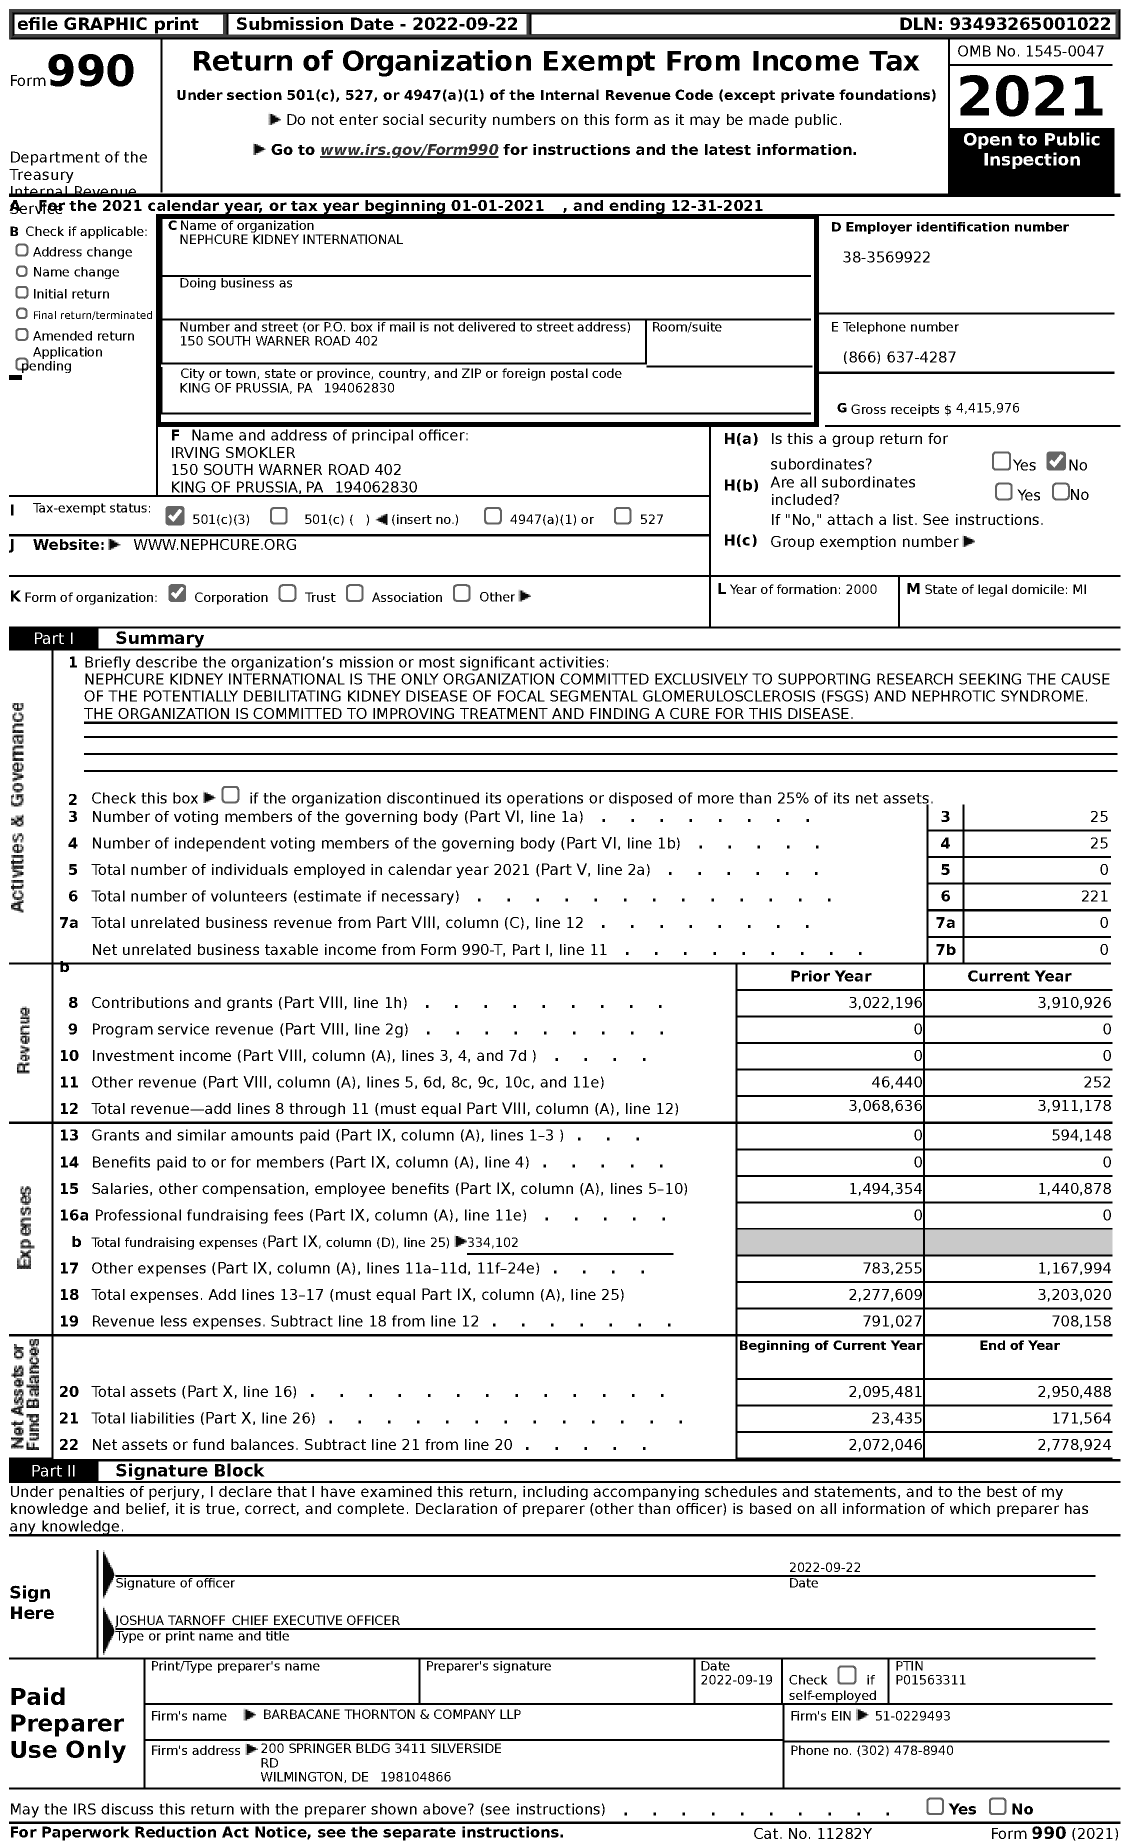 Image of first page of 2021 Form 990 for Nephcure Kidney International (NKI)